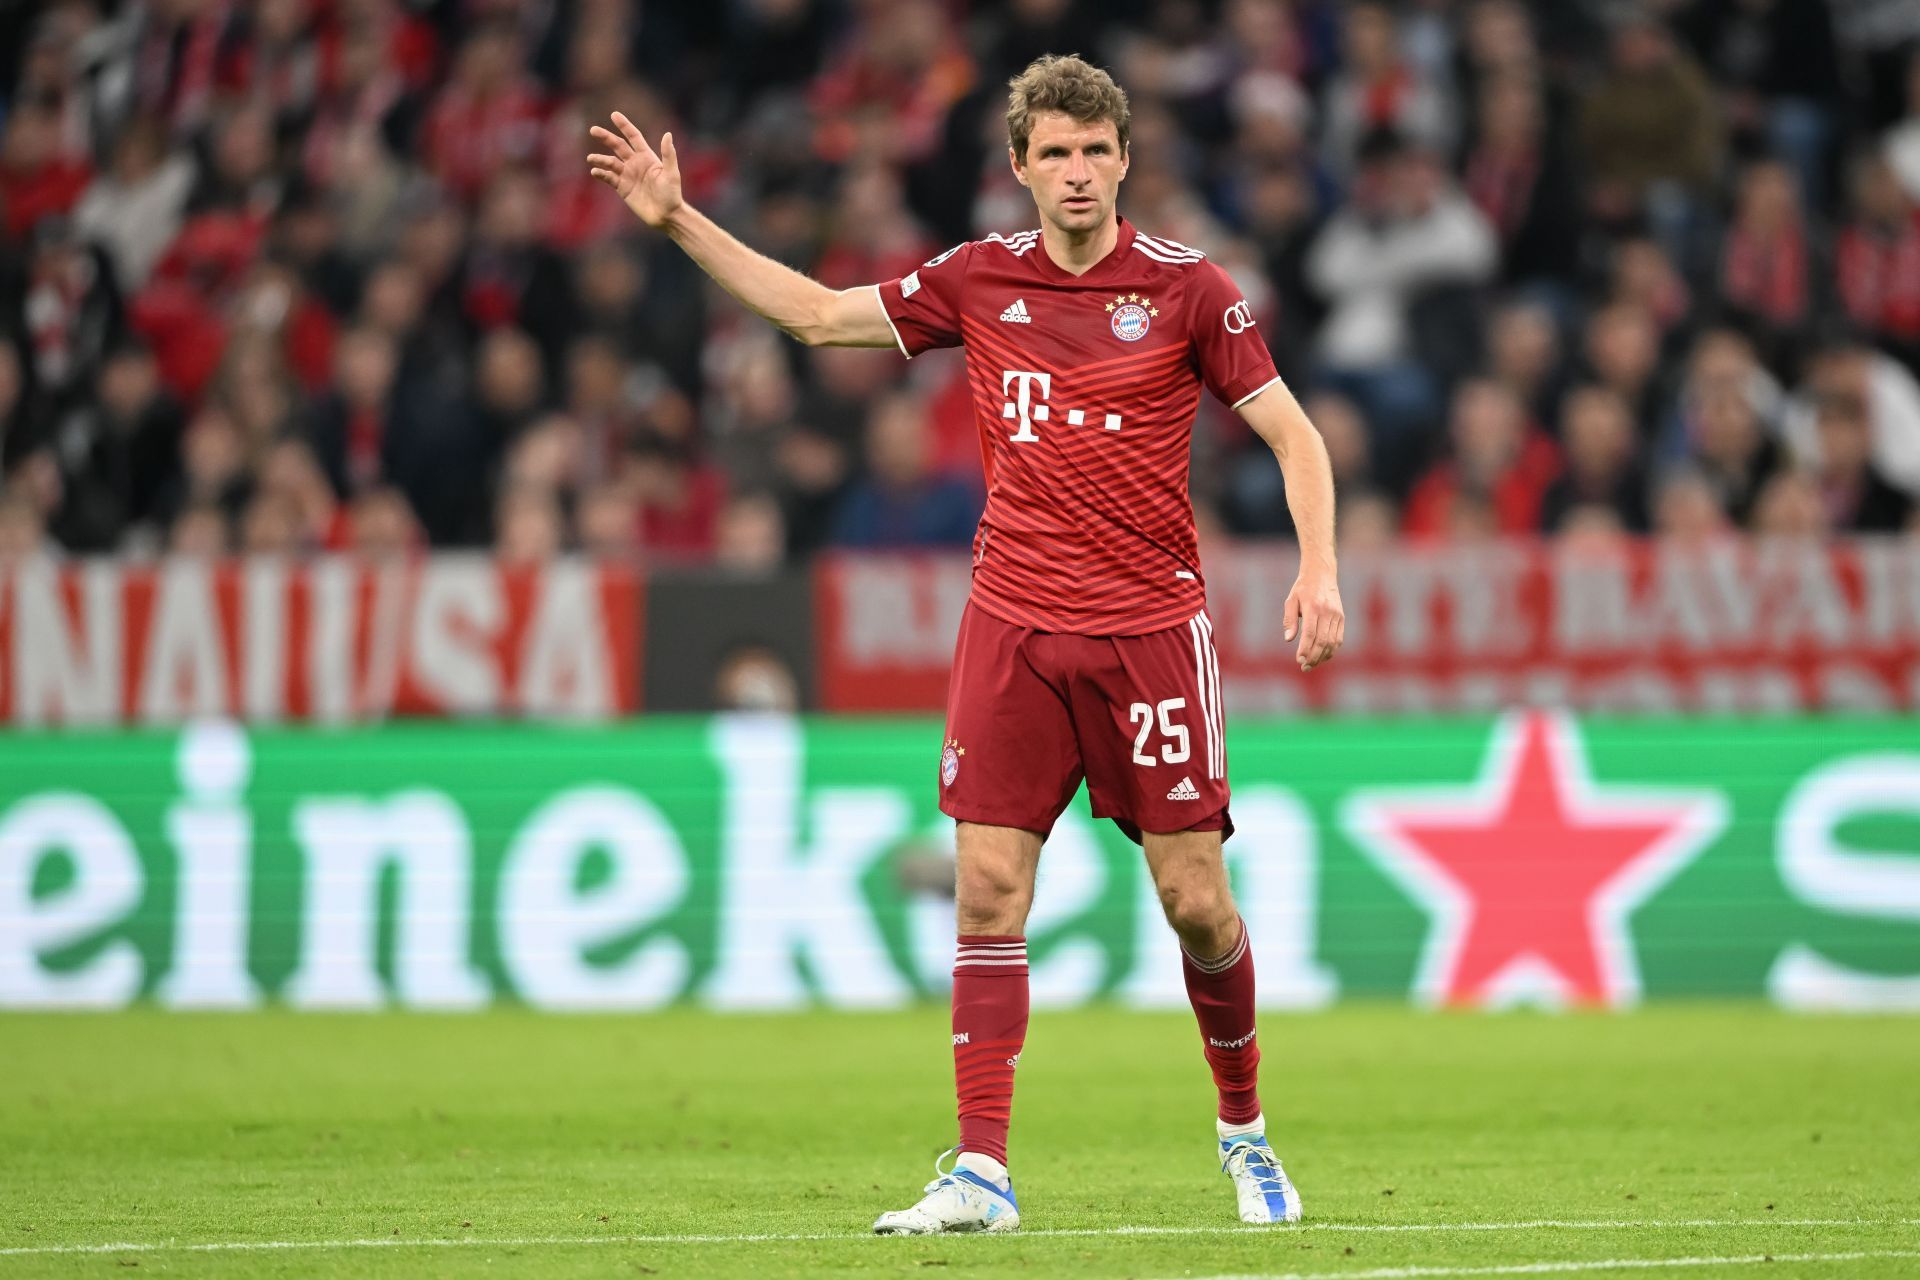 Thomas Muller in action for Bayern Munich in the UCL